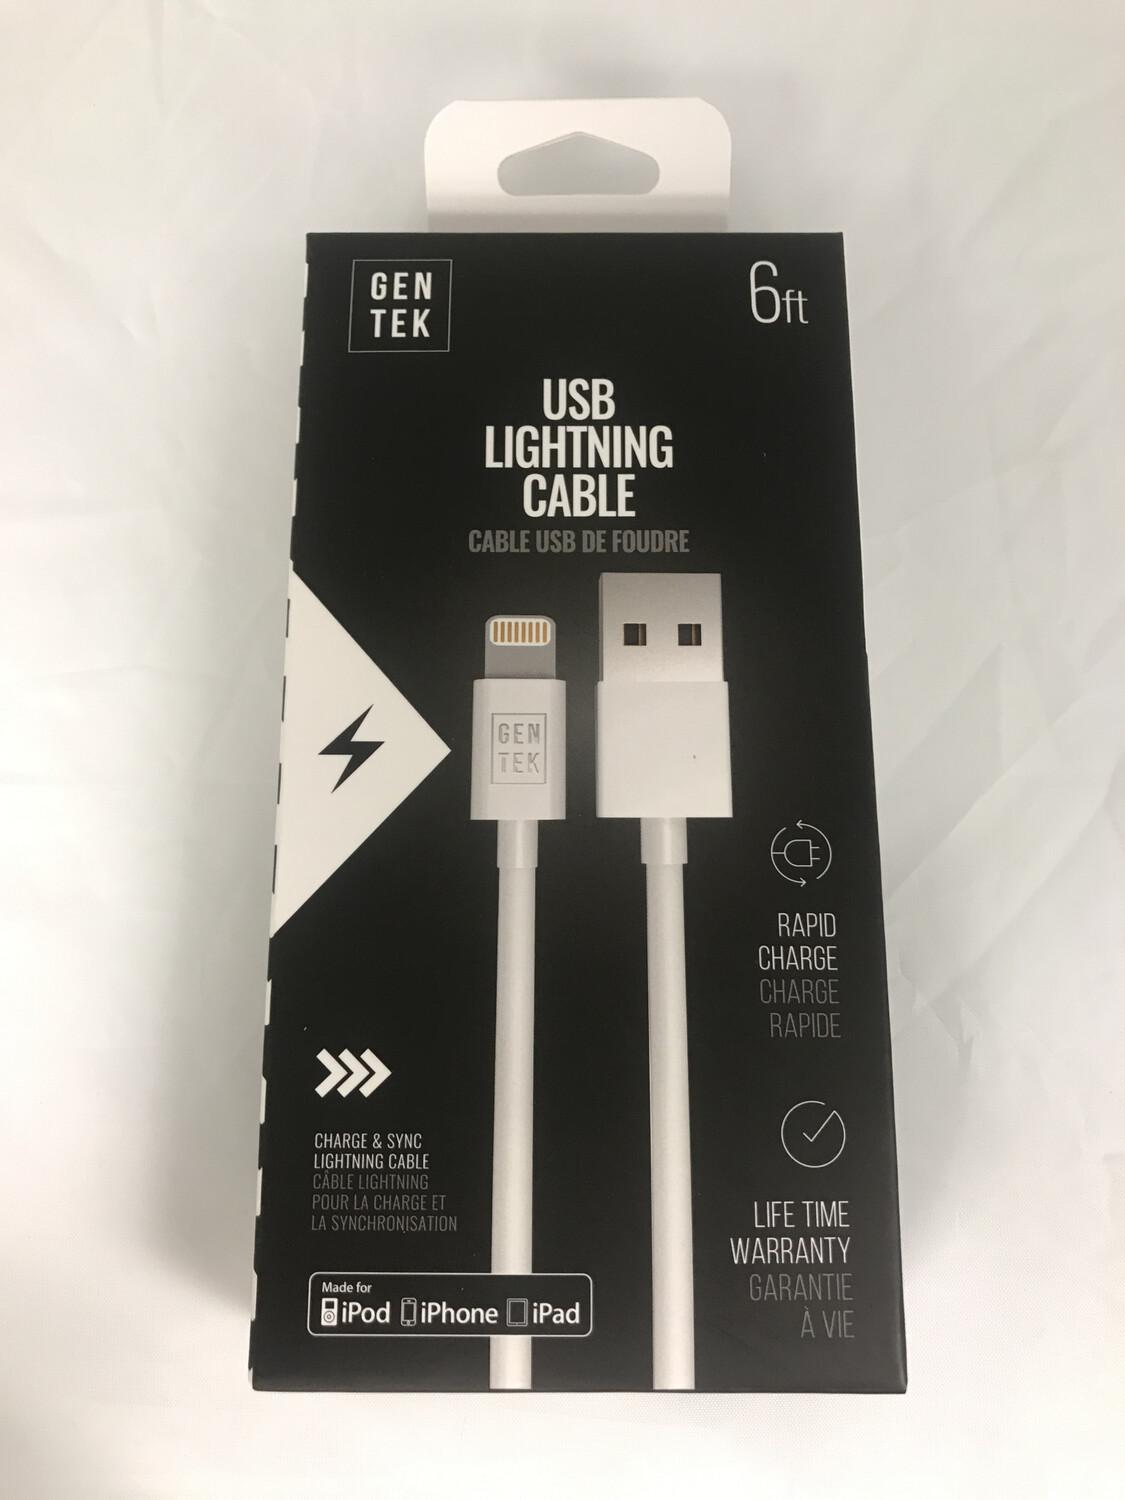 GENTEK 22012 MFI USB LIGHTNING CABLE 6FT****END USER TO CONTACT 800 NUMBER